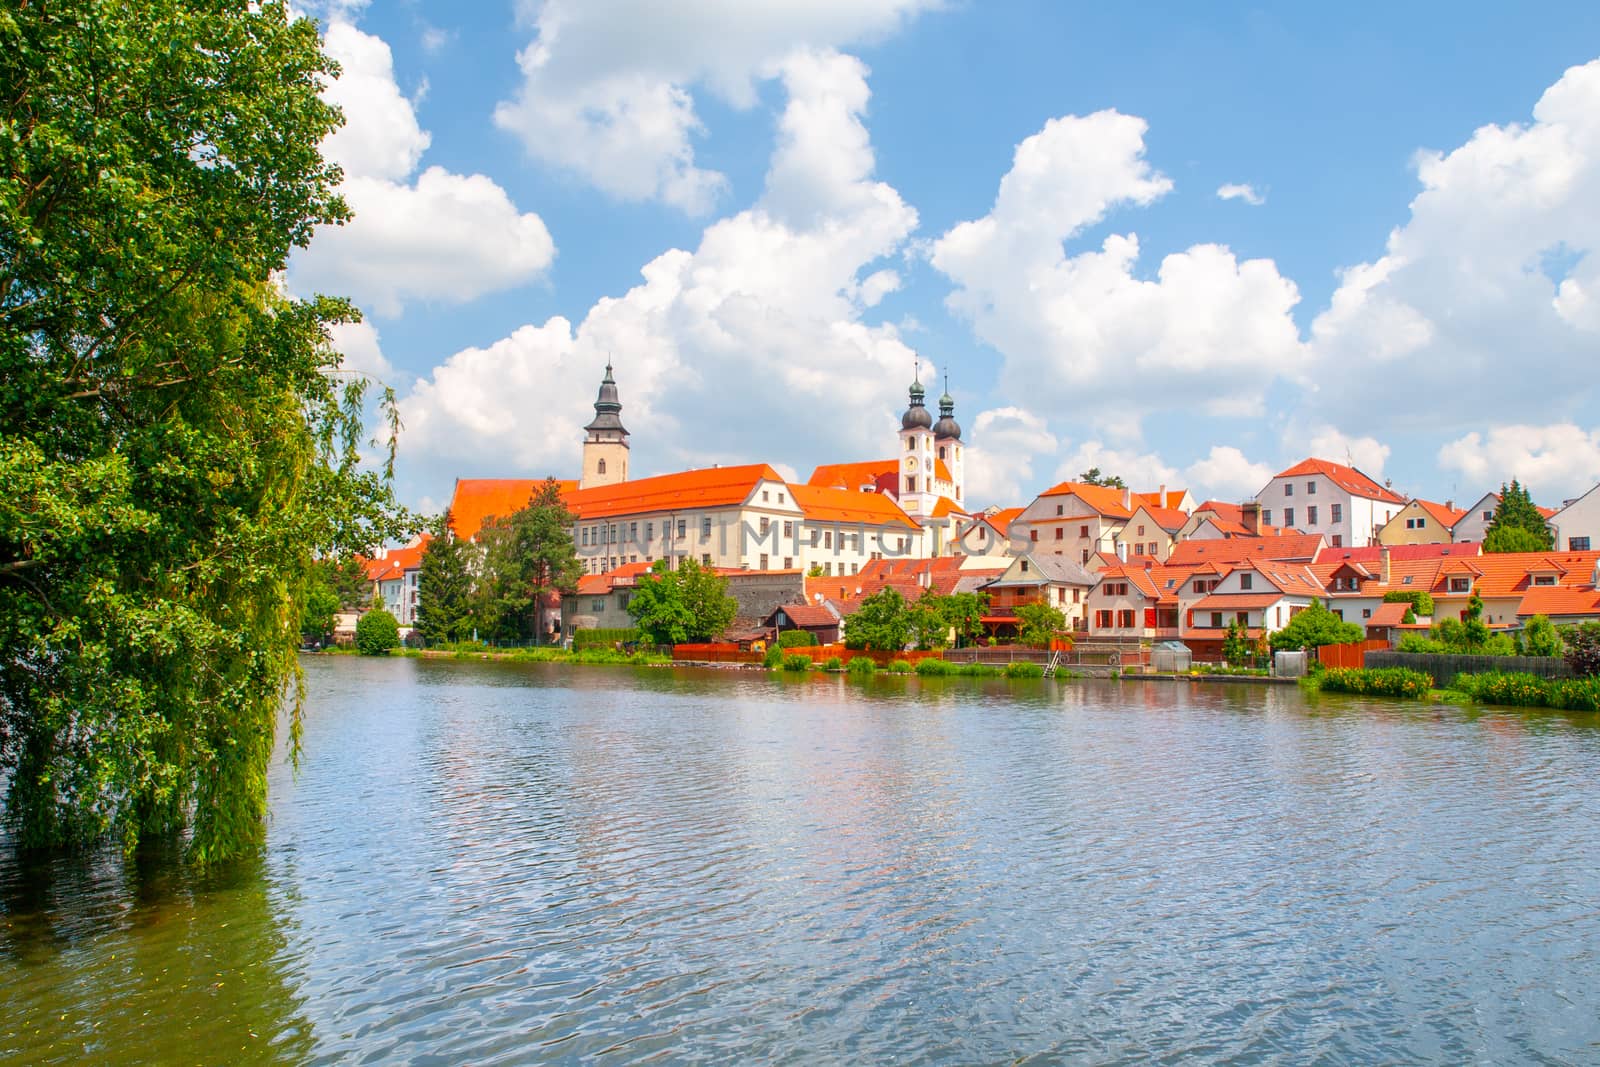 Panoramic view of Telc with reflection in Stepnicky pond, Czech Republic. UNESCO World Heritage Site.